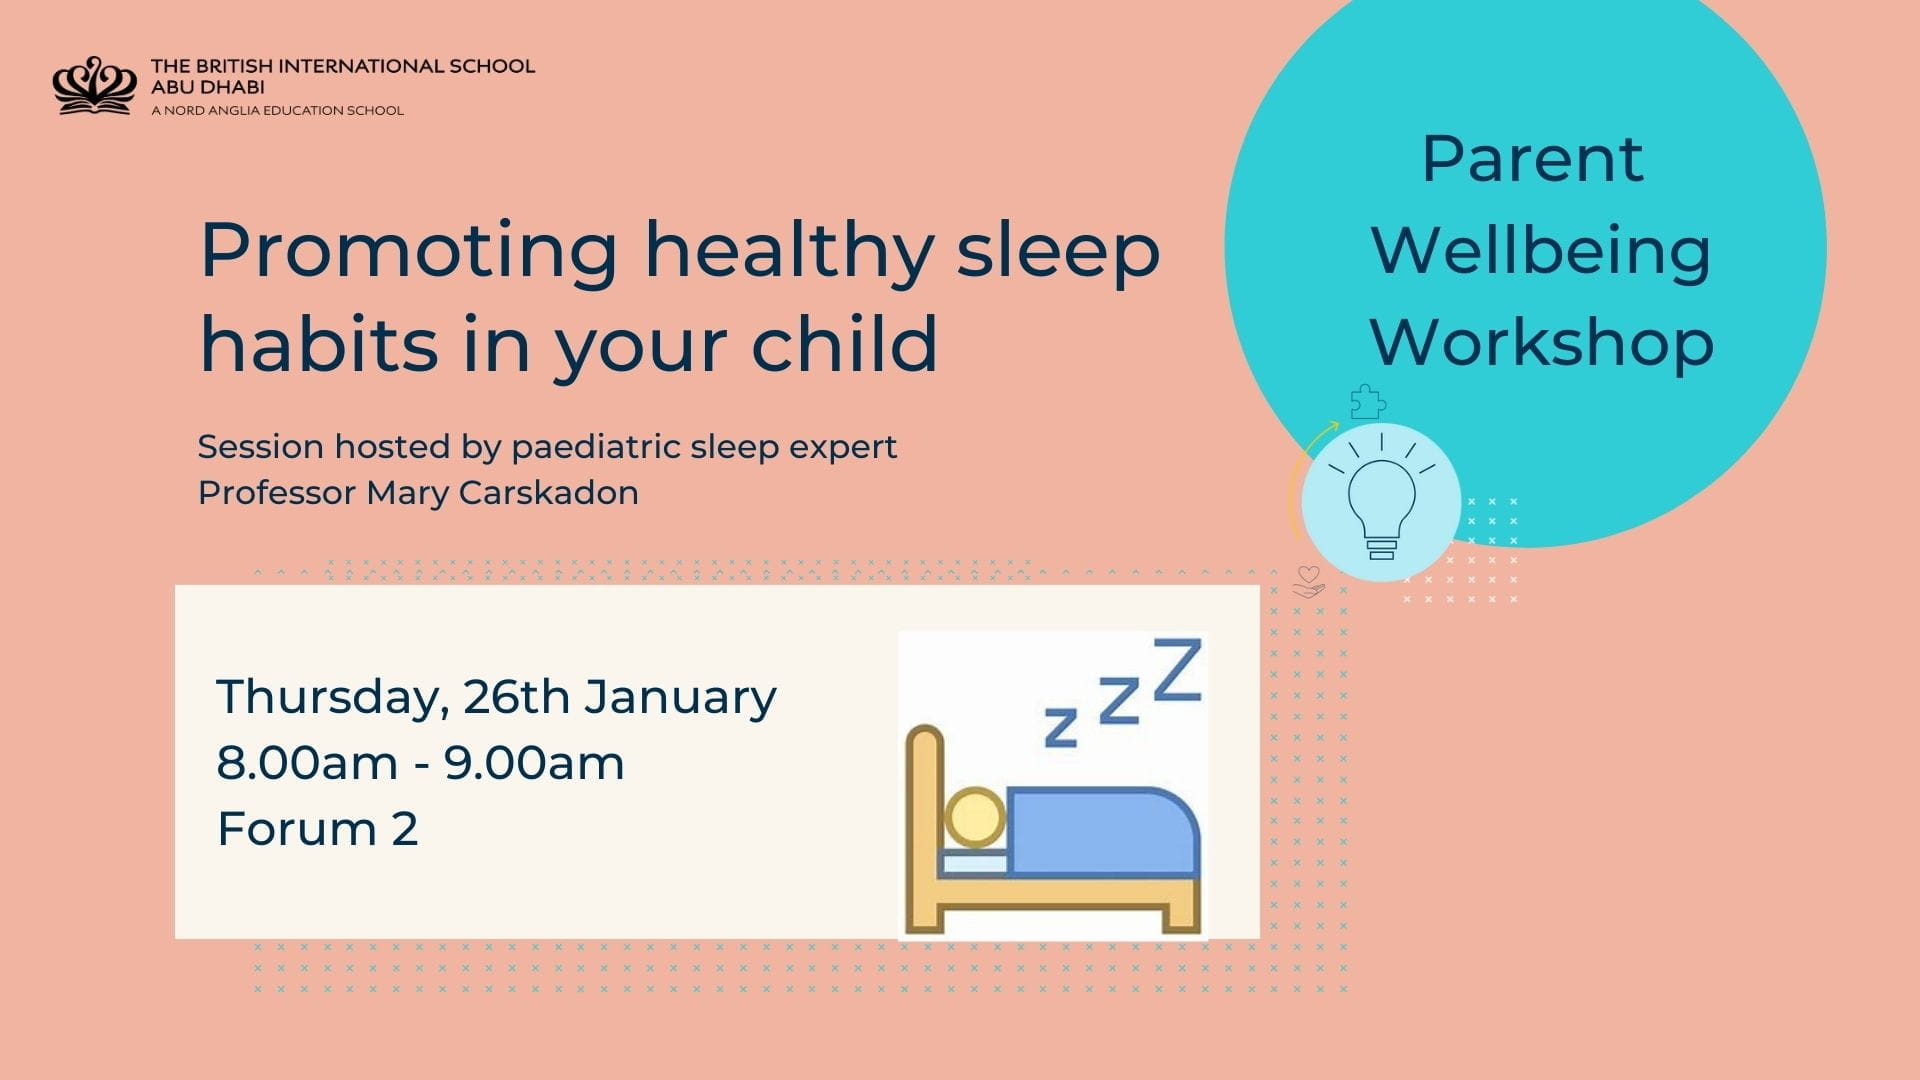 Wellbeing Workshop for Parents: Promoting healthy sleep habits in your child - Promoting healthy sleep habits in your child